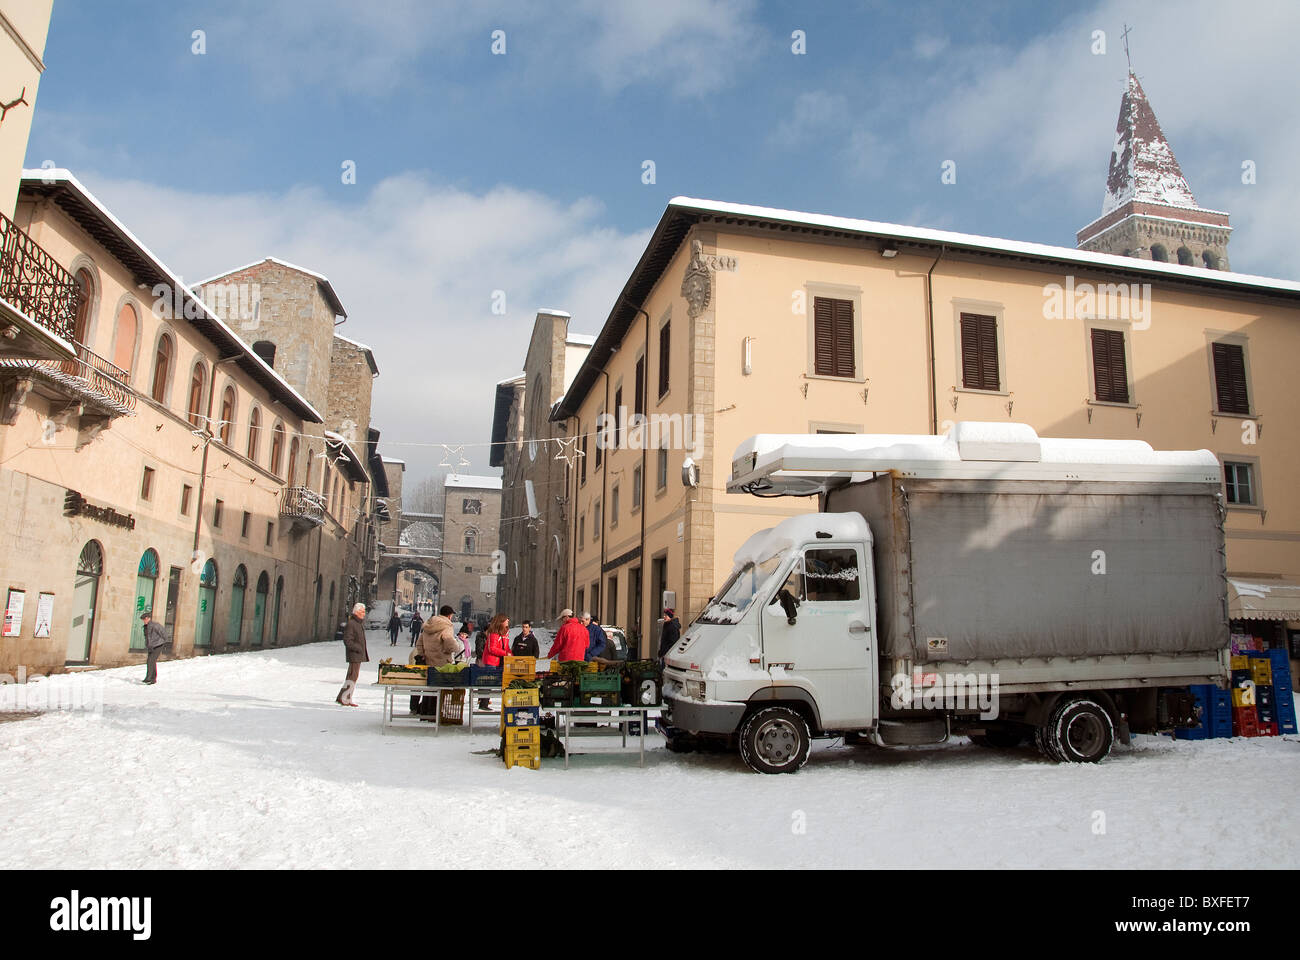 Market fruit seller in the piazza of Tuscan town of Sansepolcro in December snow Stock Photo